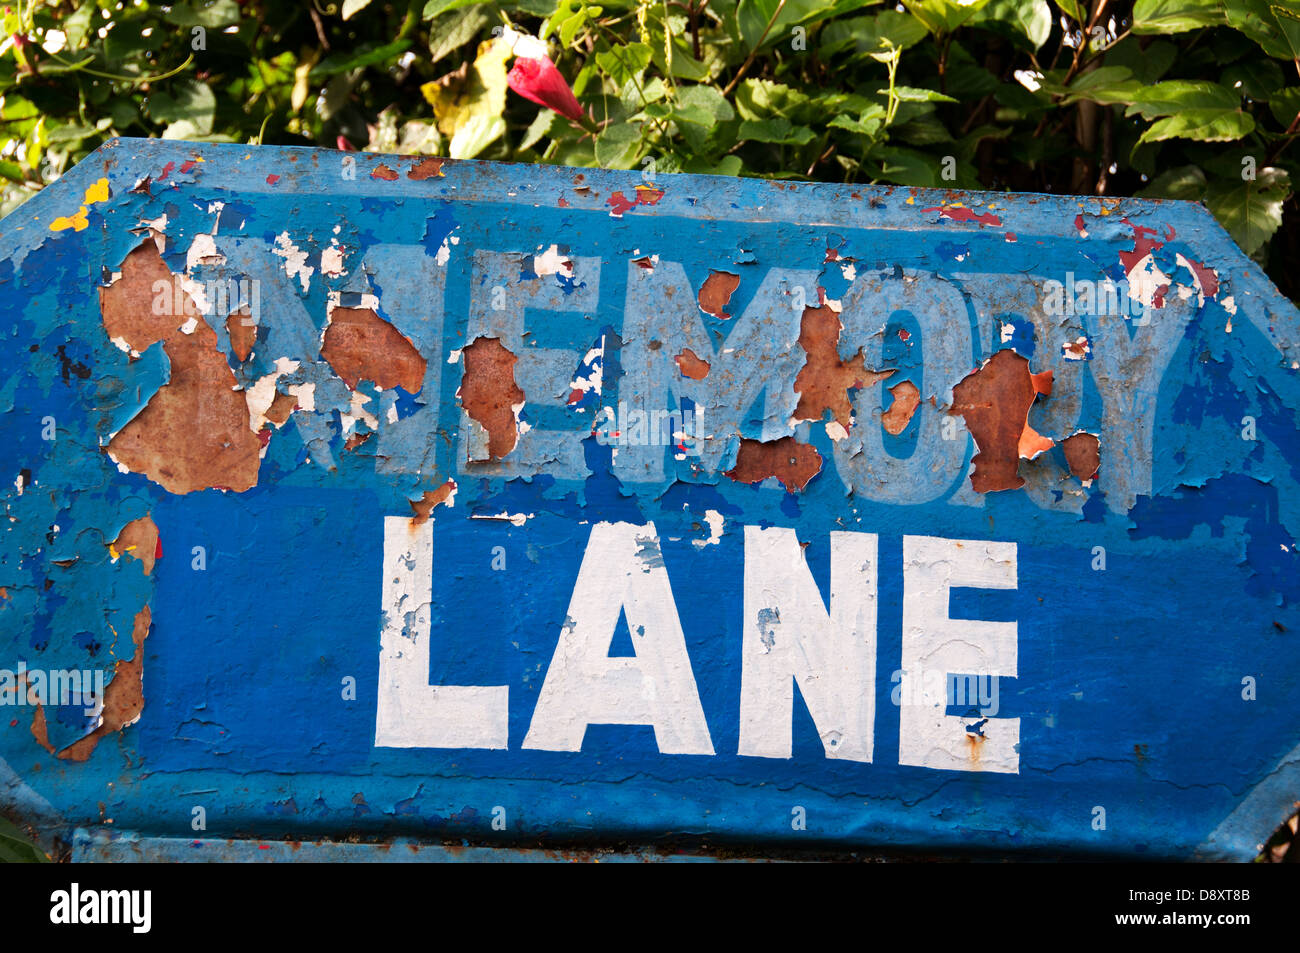 Cameroon, north west, May 2013. Kumba. Sign for Memory Lane. Stock Photo